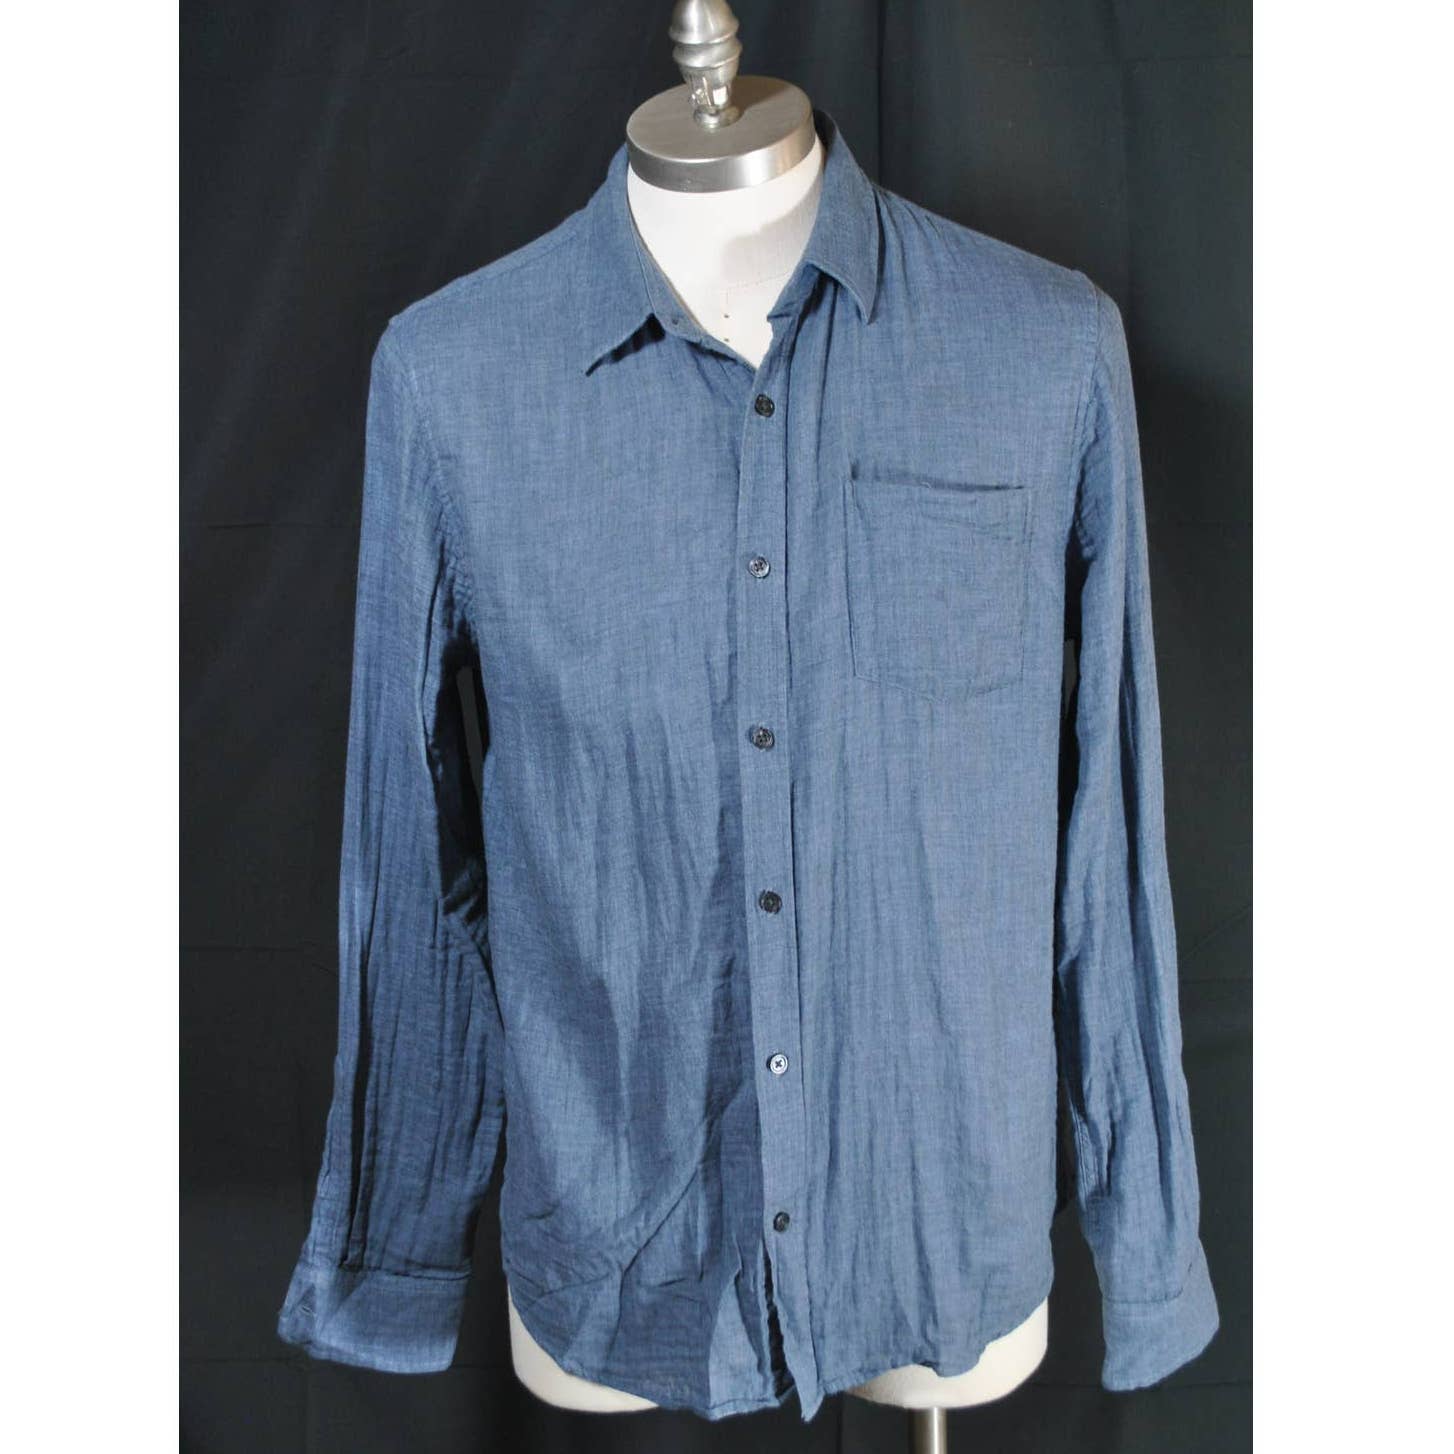 Vince Chambray Blue Button Up Shirt - M